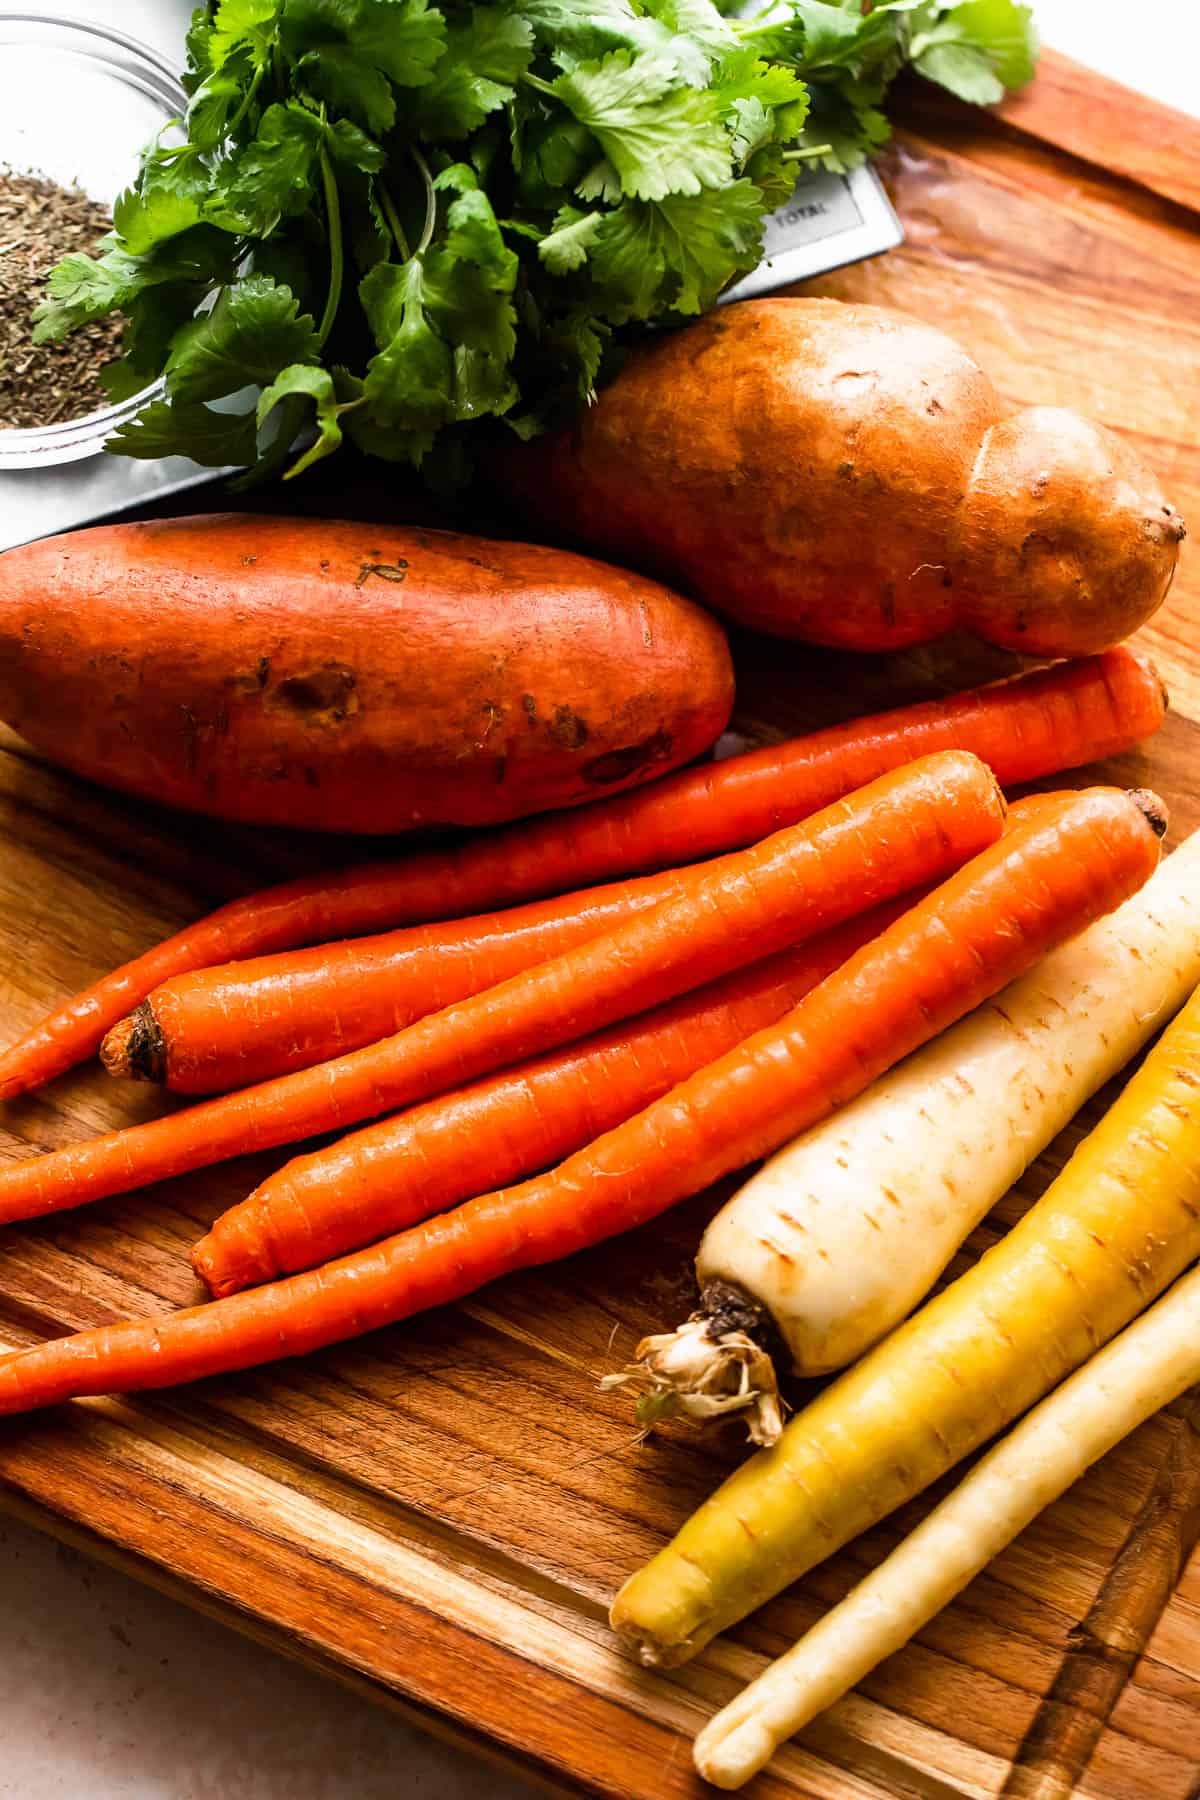 whole sweet potatoes, carrots, parsnips. and parsley on a wooden chopping board